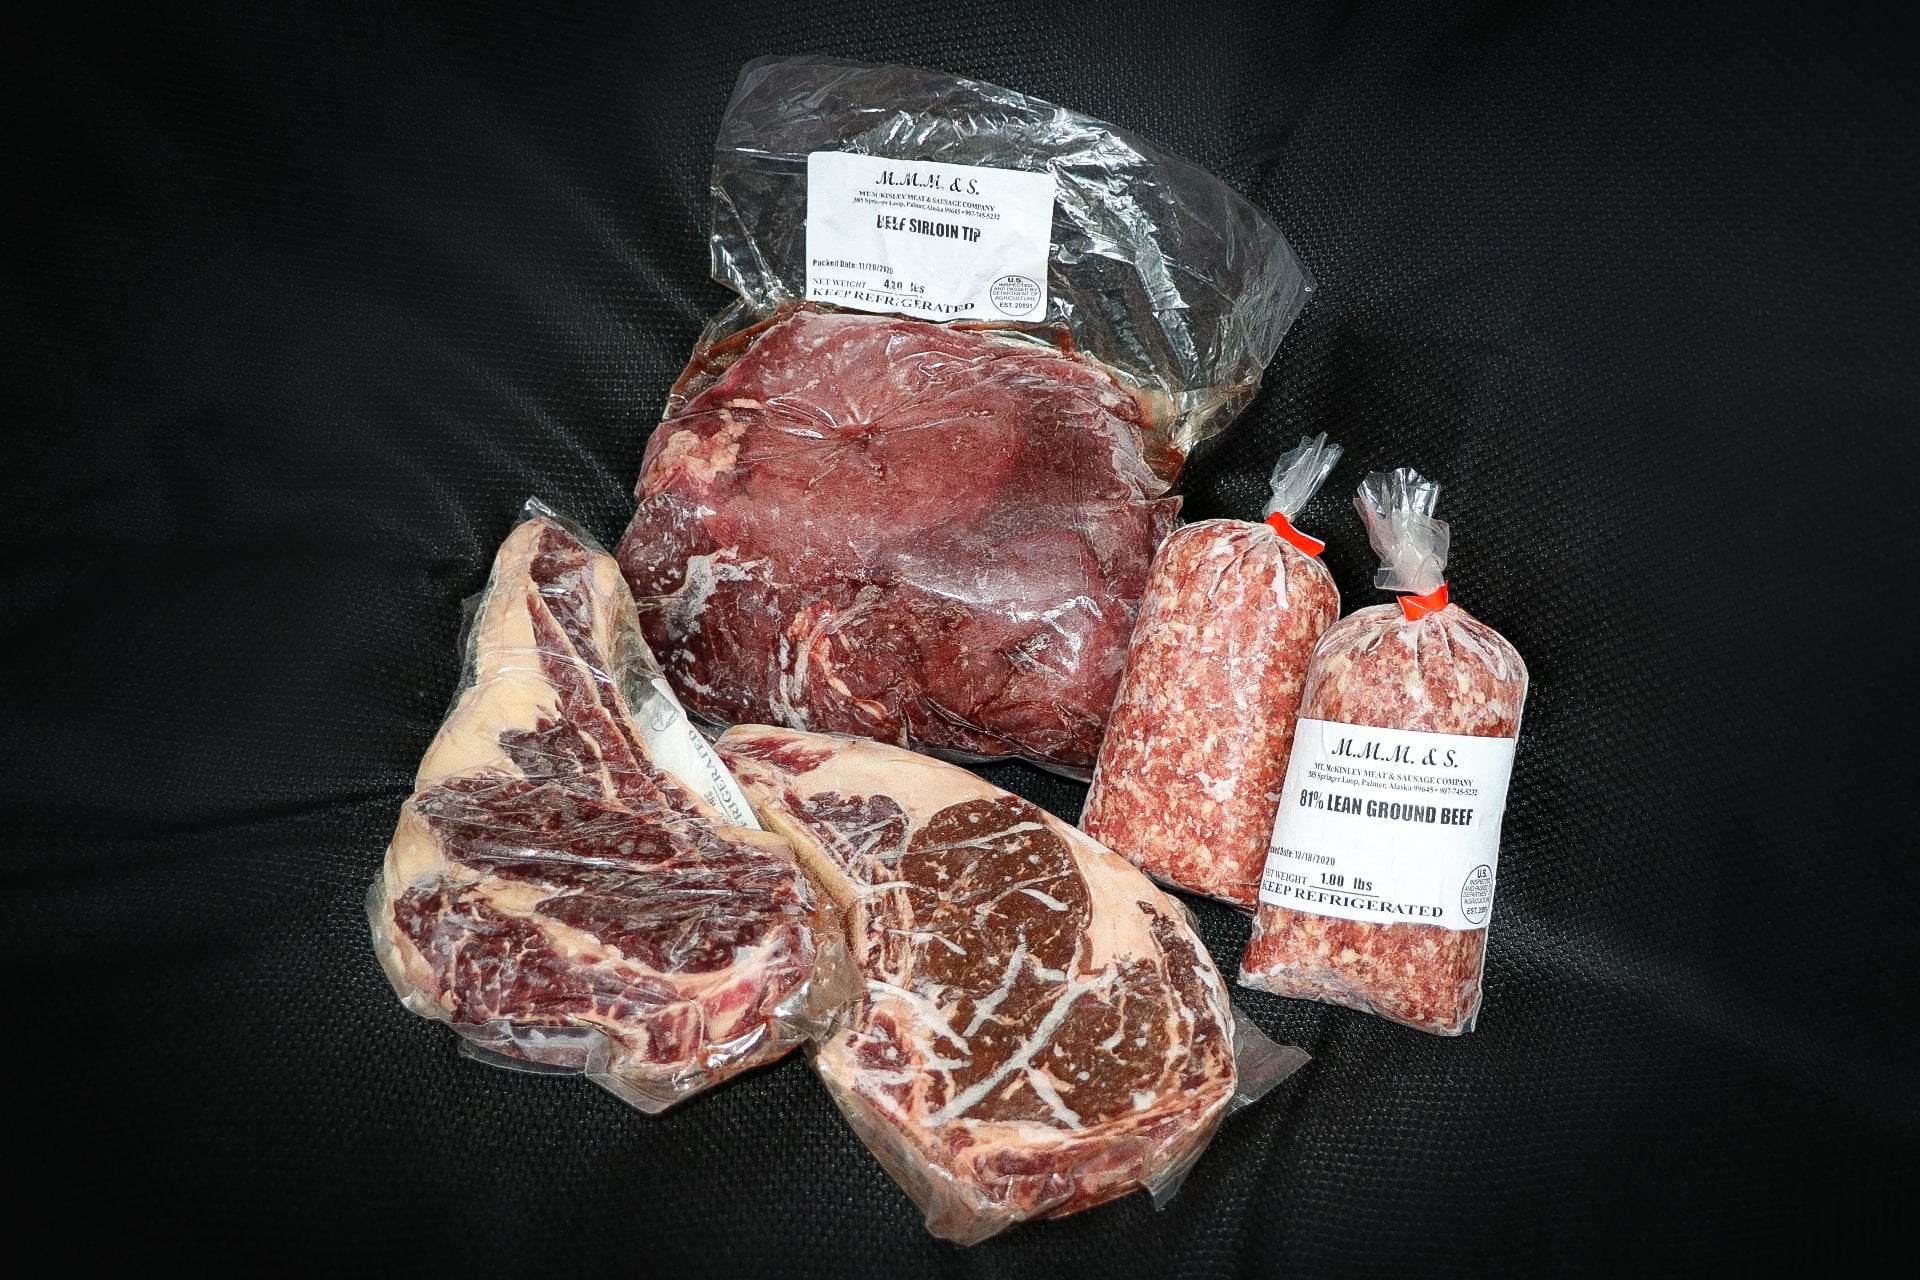 Beef: Deposit- 1/16 Share Box 32-34lbs (On-Going)